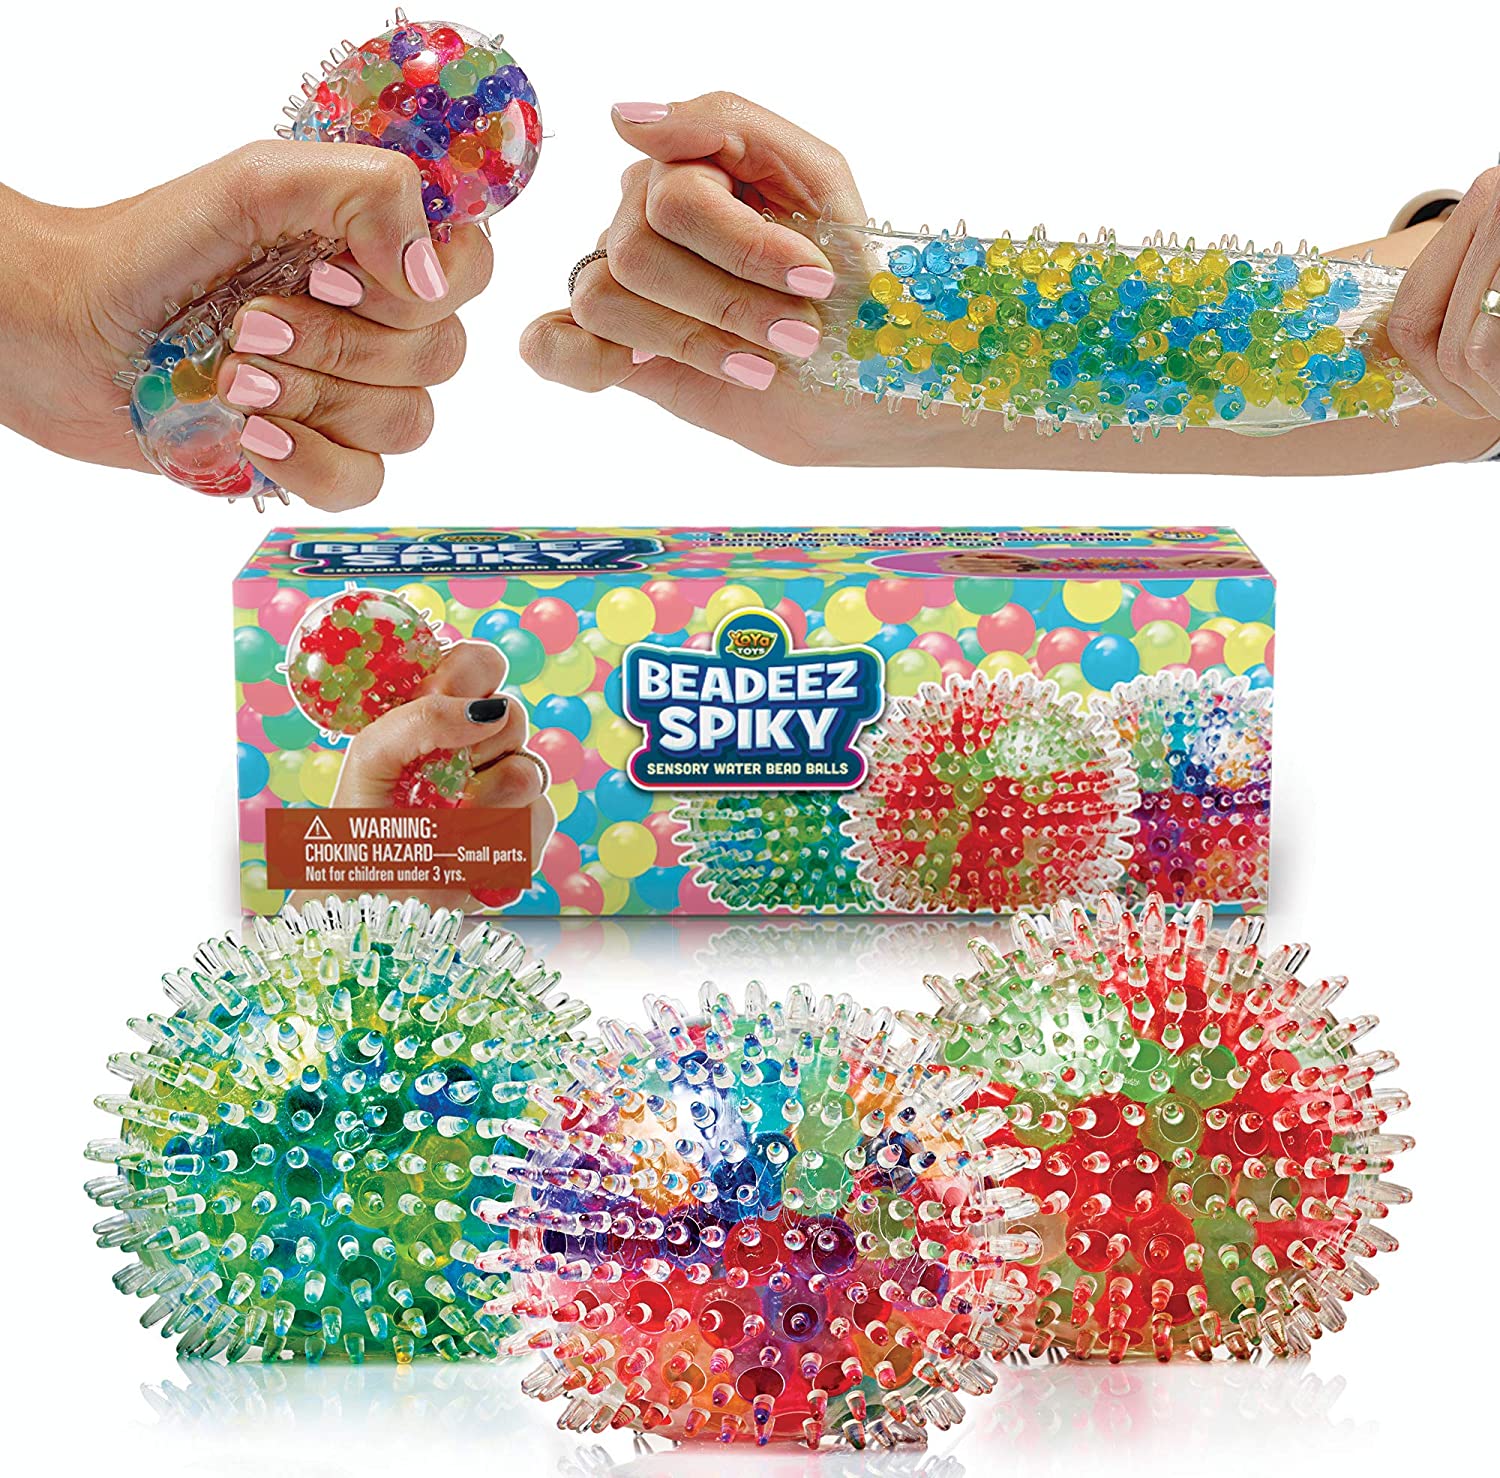 Details about   Fun Sensory Toys Fidget Stress Sensory Autism ADHD Special Needs Gift Lots 